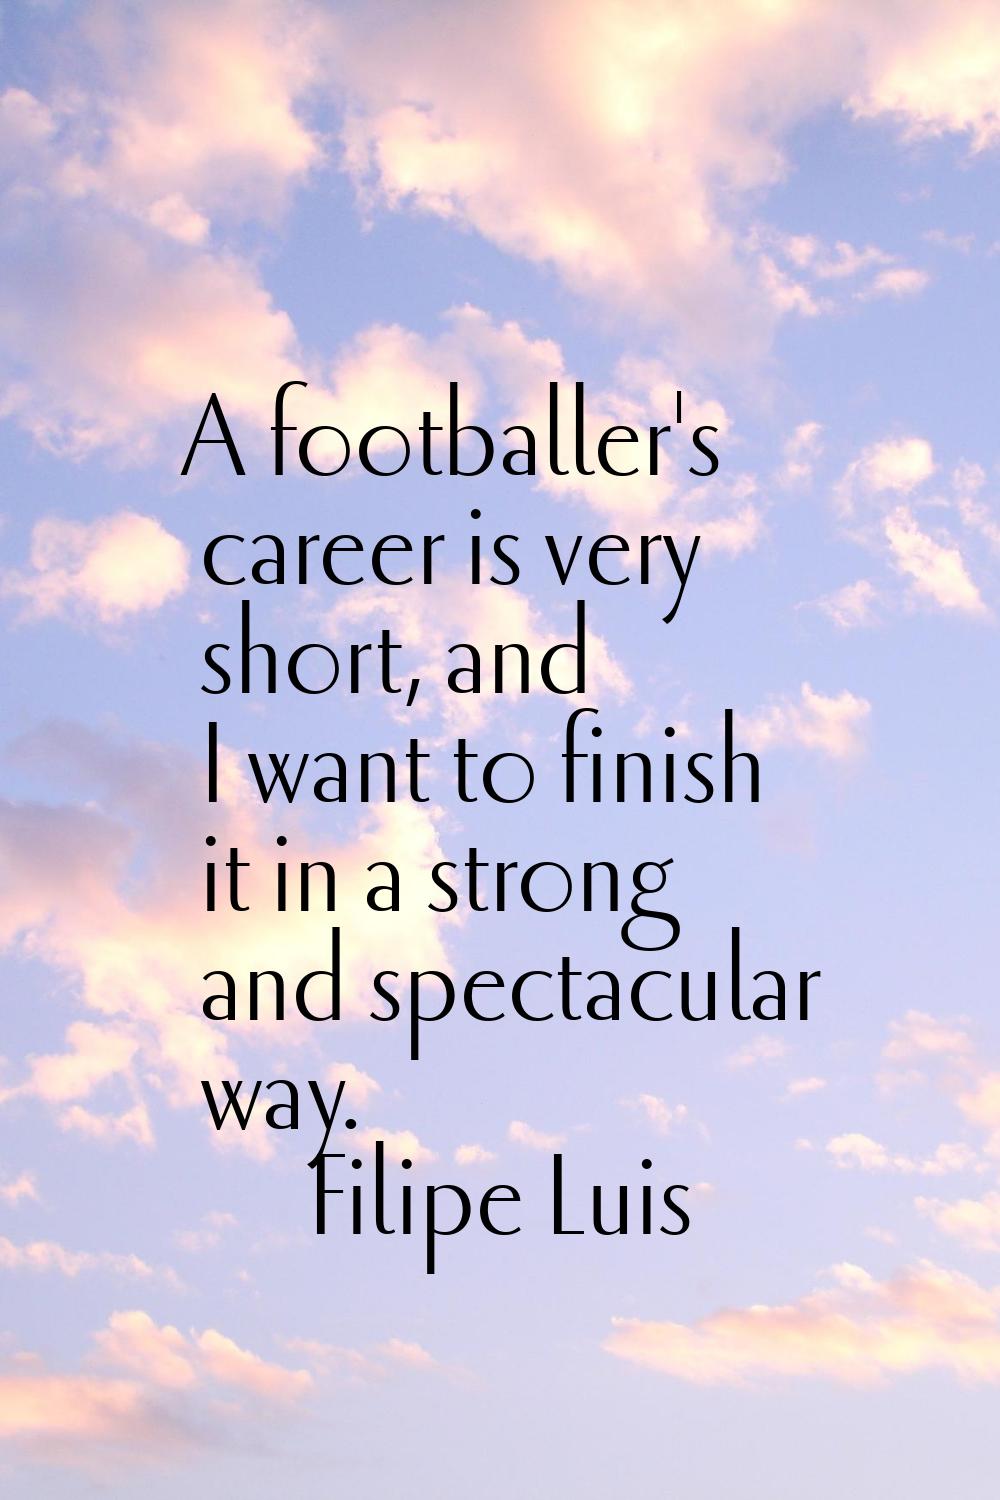 A footballer's career is very short, and I want to finish it in a strong and spectacular way.